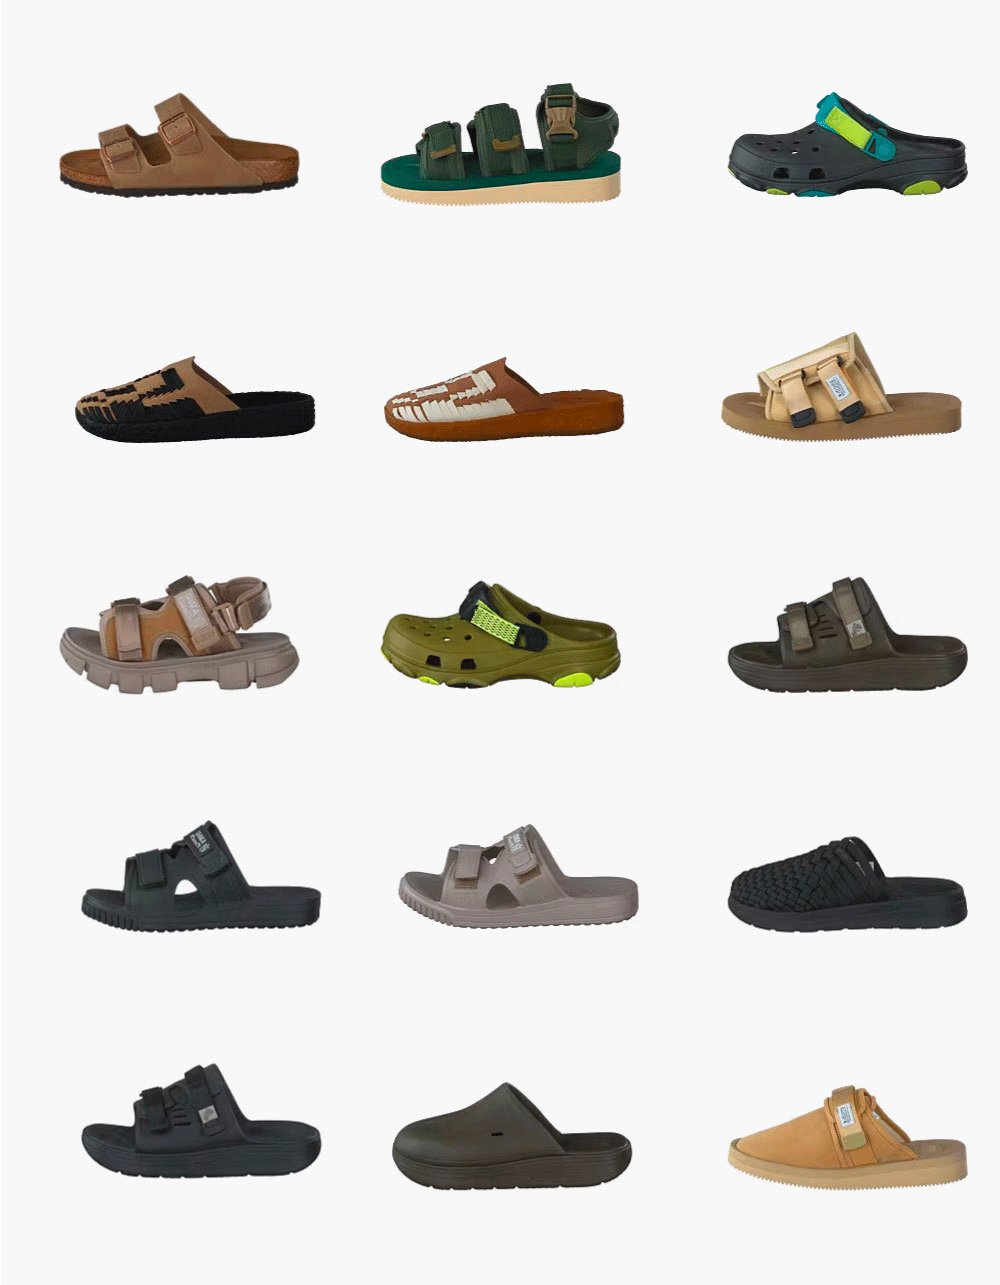 SANDALS/SLEEPERS AND MULES